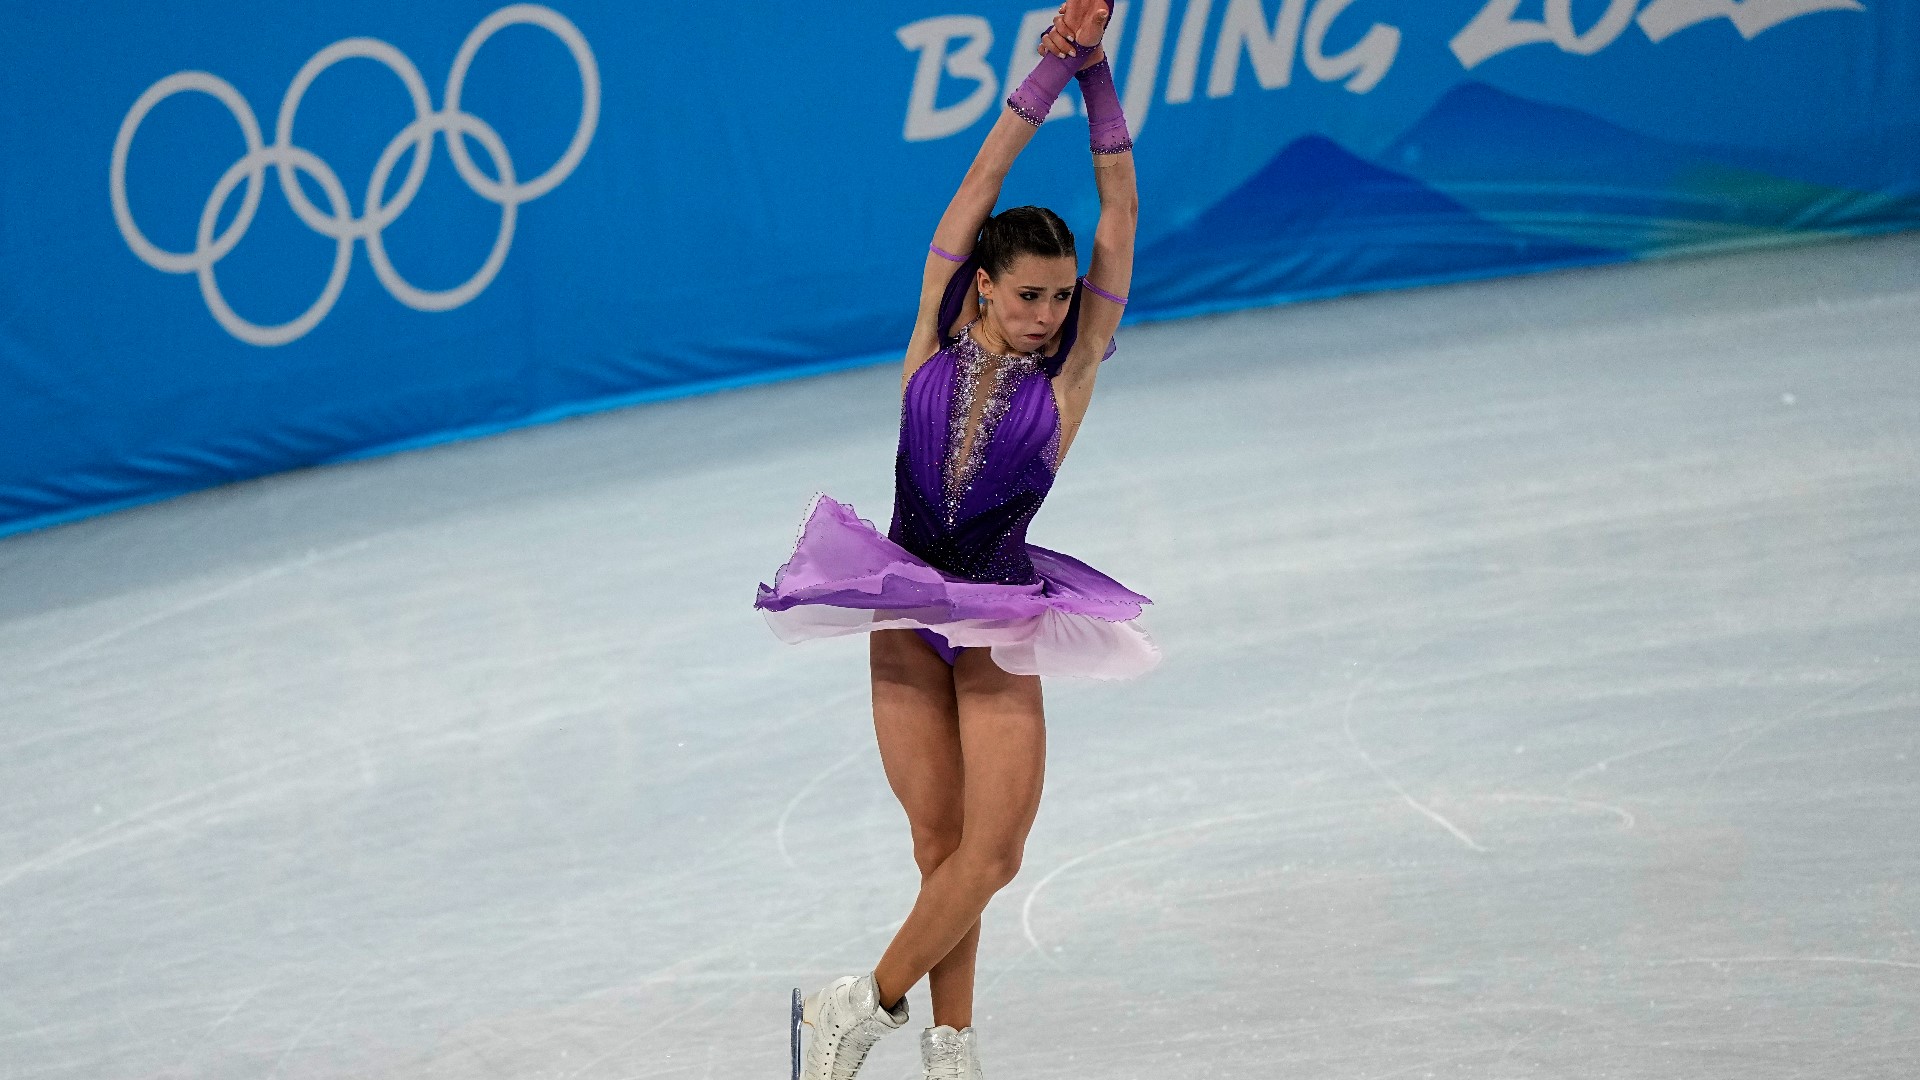 The 15-year-old figure skater from Russia performed a Quad Salchow followed by a quad toe-triple toe combination to help Russian Olympic Committee win the gold medal